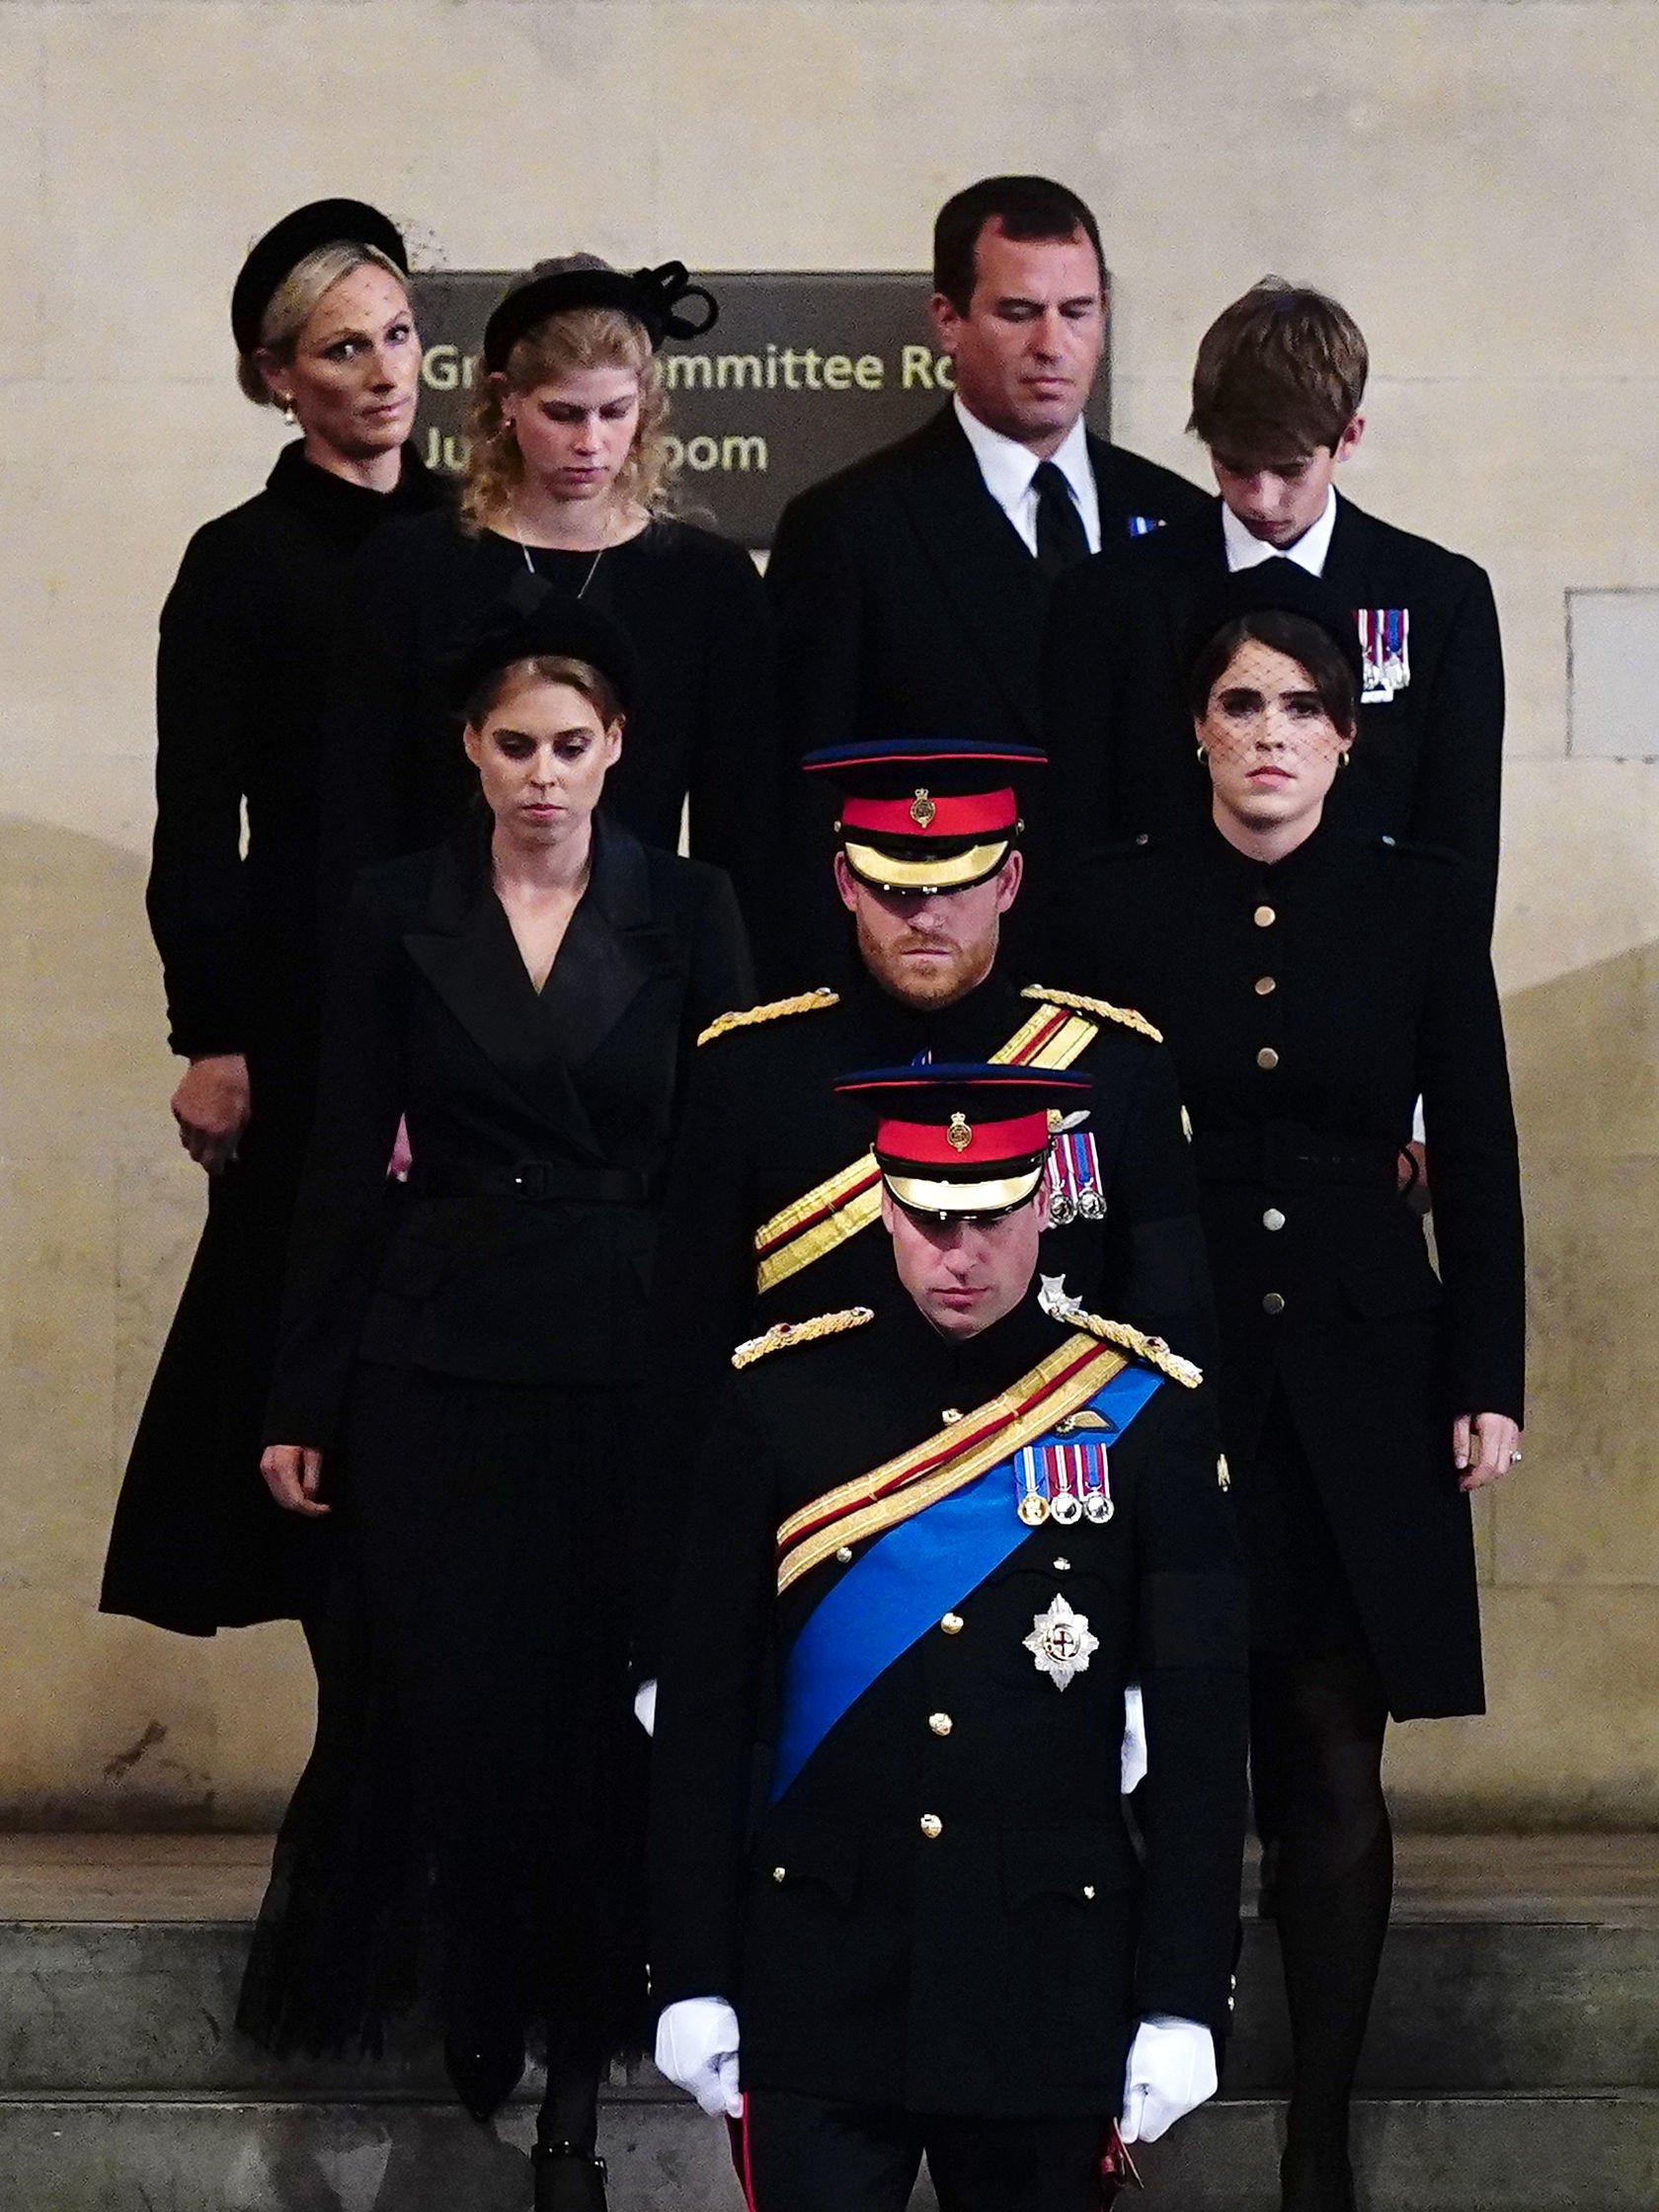 Prince William, Prince Harry, Princess Eugenie, Princess Beatrice, Peter Phillips, Zara Tindall, Lady Louise Windsor and James, Viscount Severn hold a vigil for Queen Elizabeth II at Westminster Hall on September 17, 2022. in London, England |  Source: Getty Images